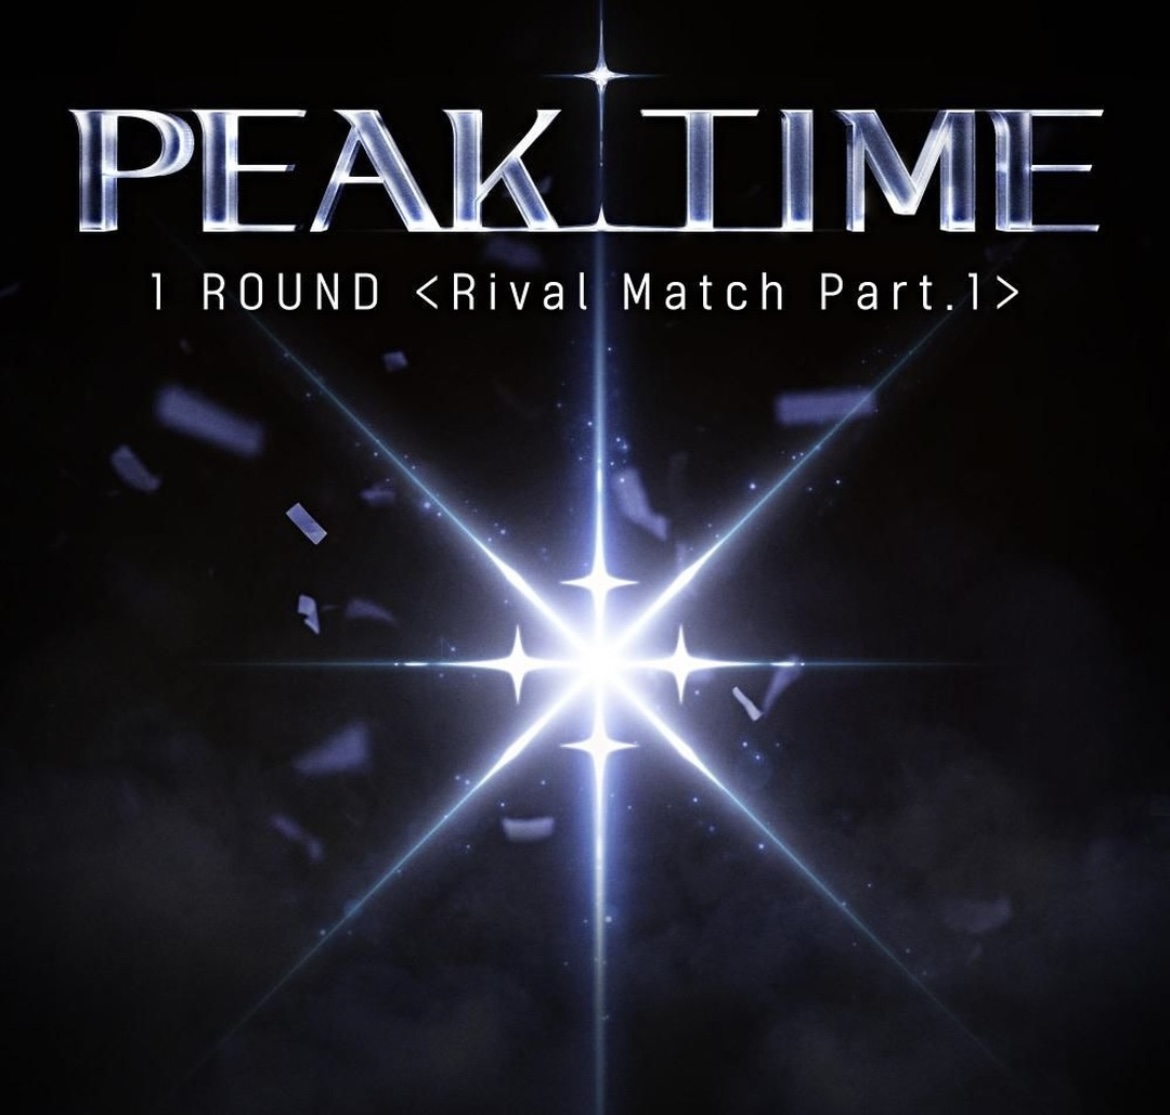 PEAK TIME - 1 Round <Rival match> Part.1